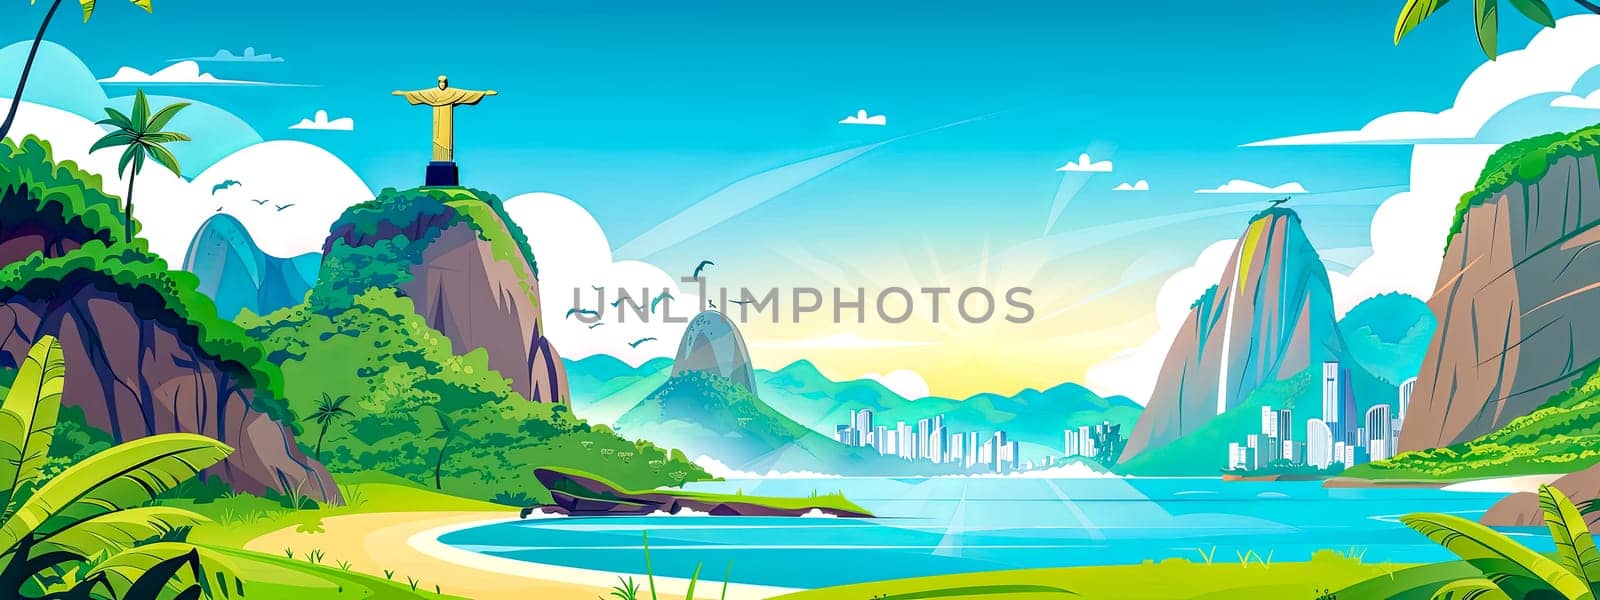 An artful cartoon illustration of a tropical landscape with a cross on top of a mountain, depicting a natural landscape with grassland, water resources, and a picturesque sky